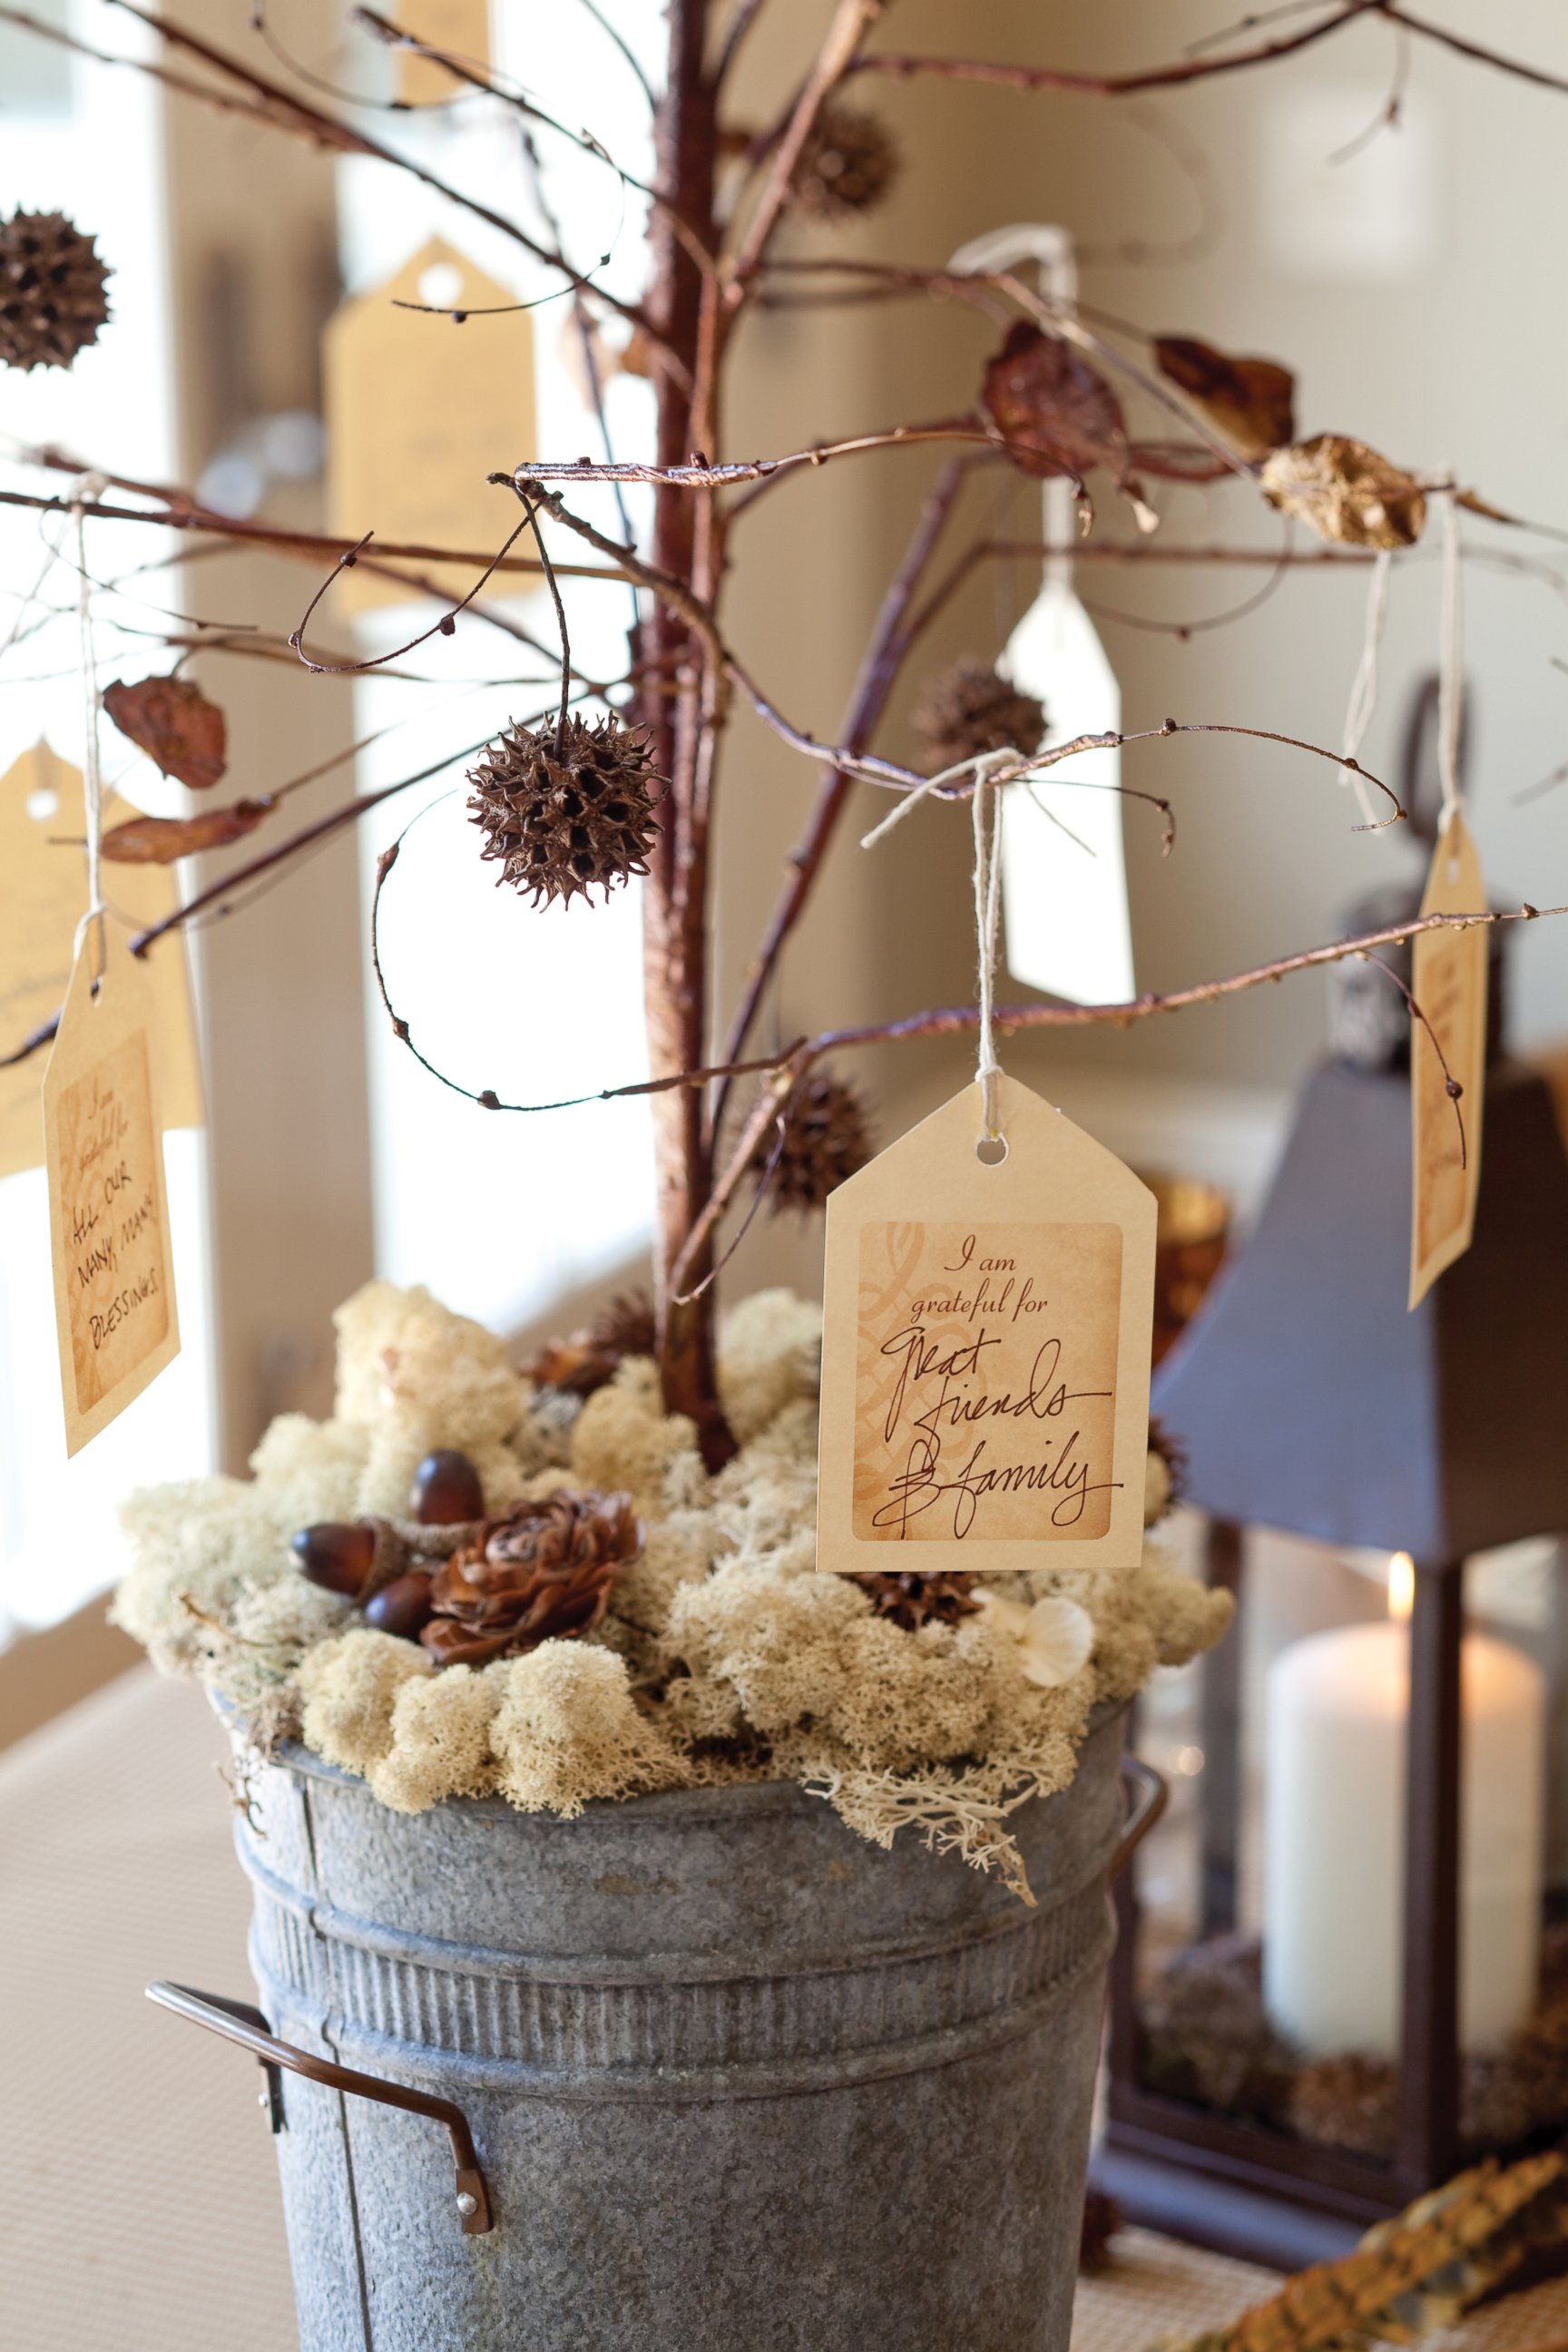 PHOTO: Seasonal Place Cards with an Acorn Affixed to a Tented Place Card.